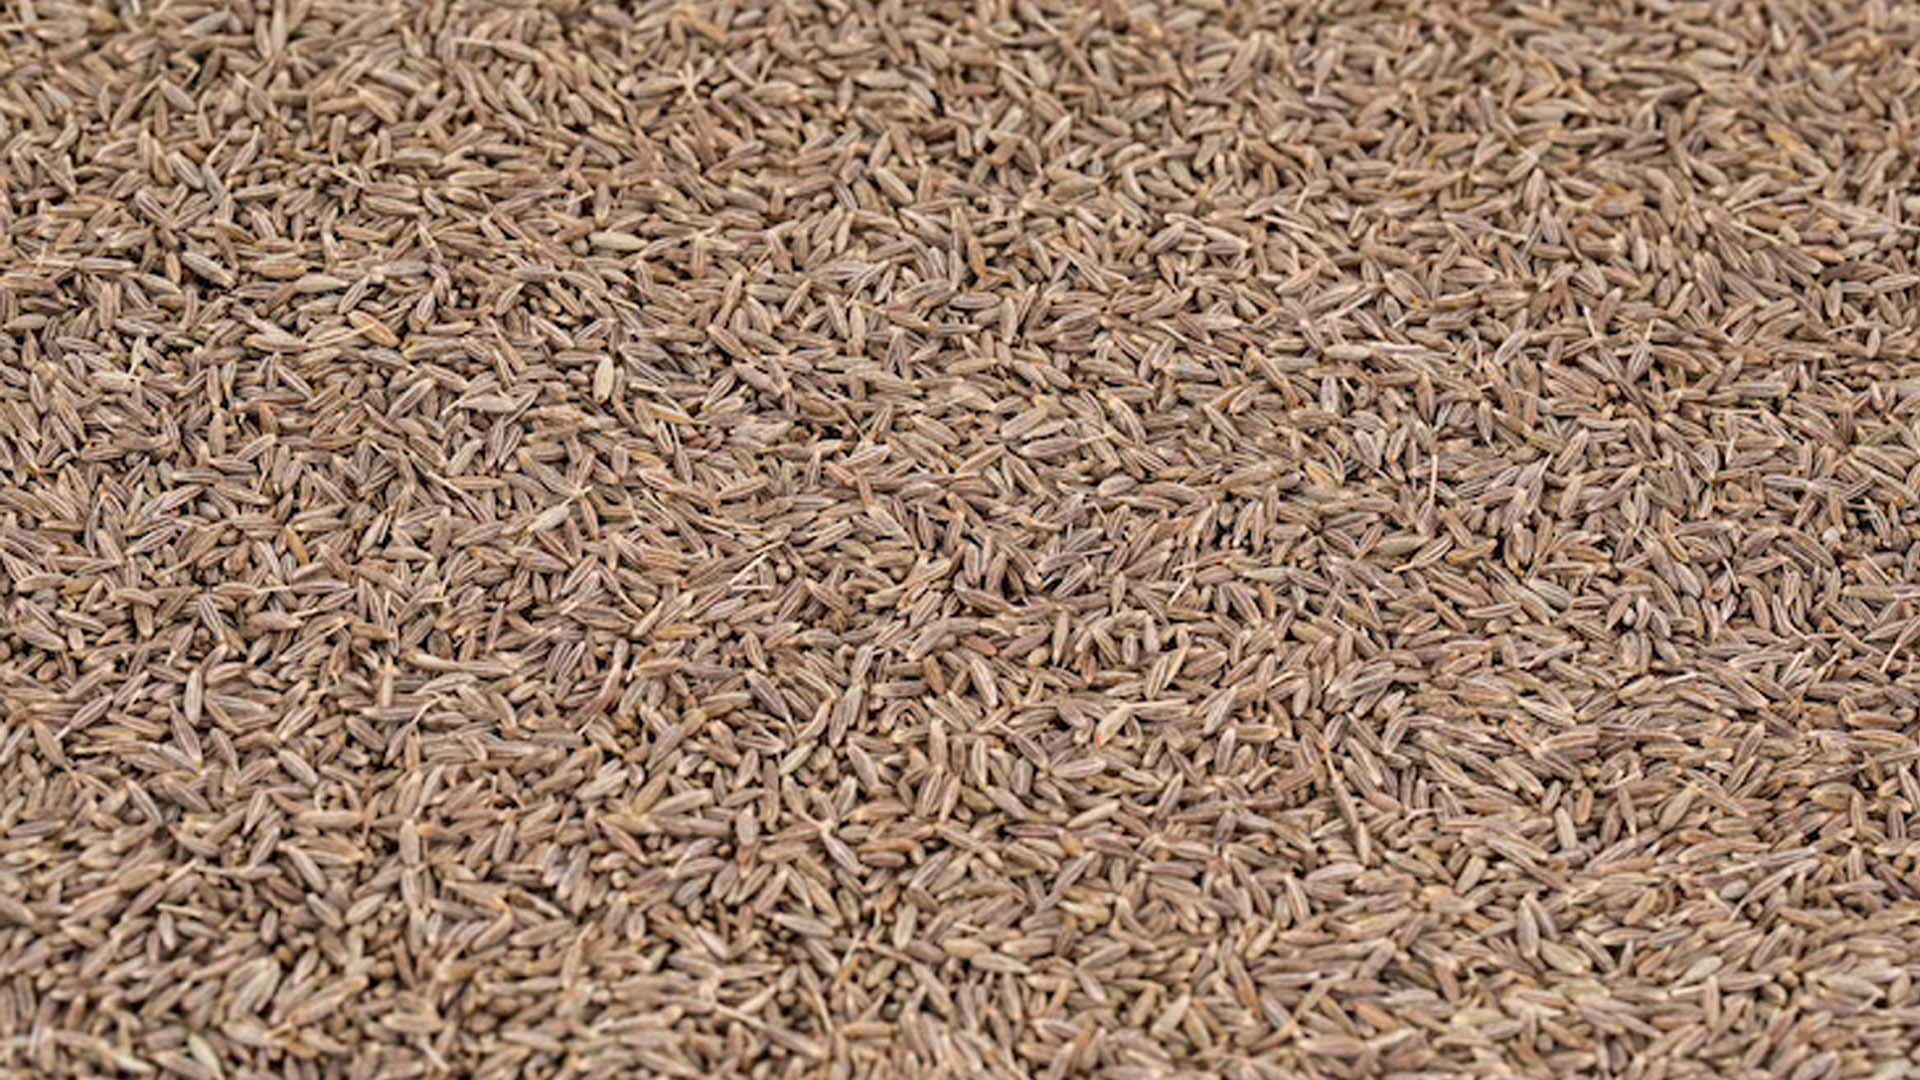 Nutritional value of cumin seeds